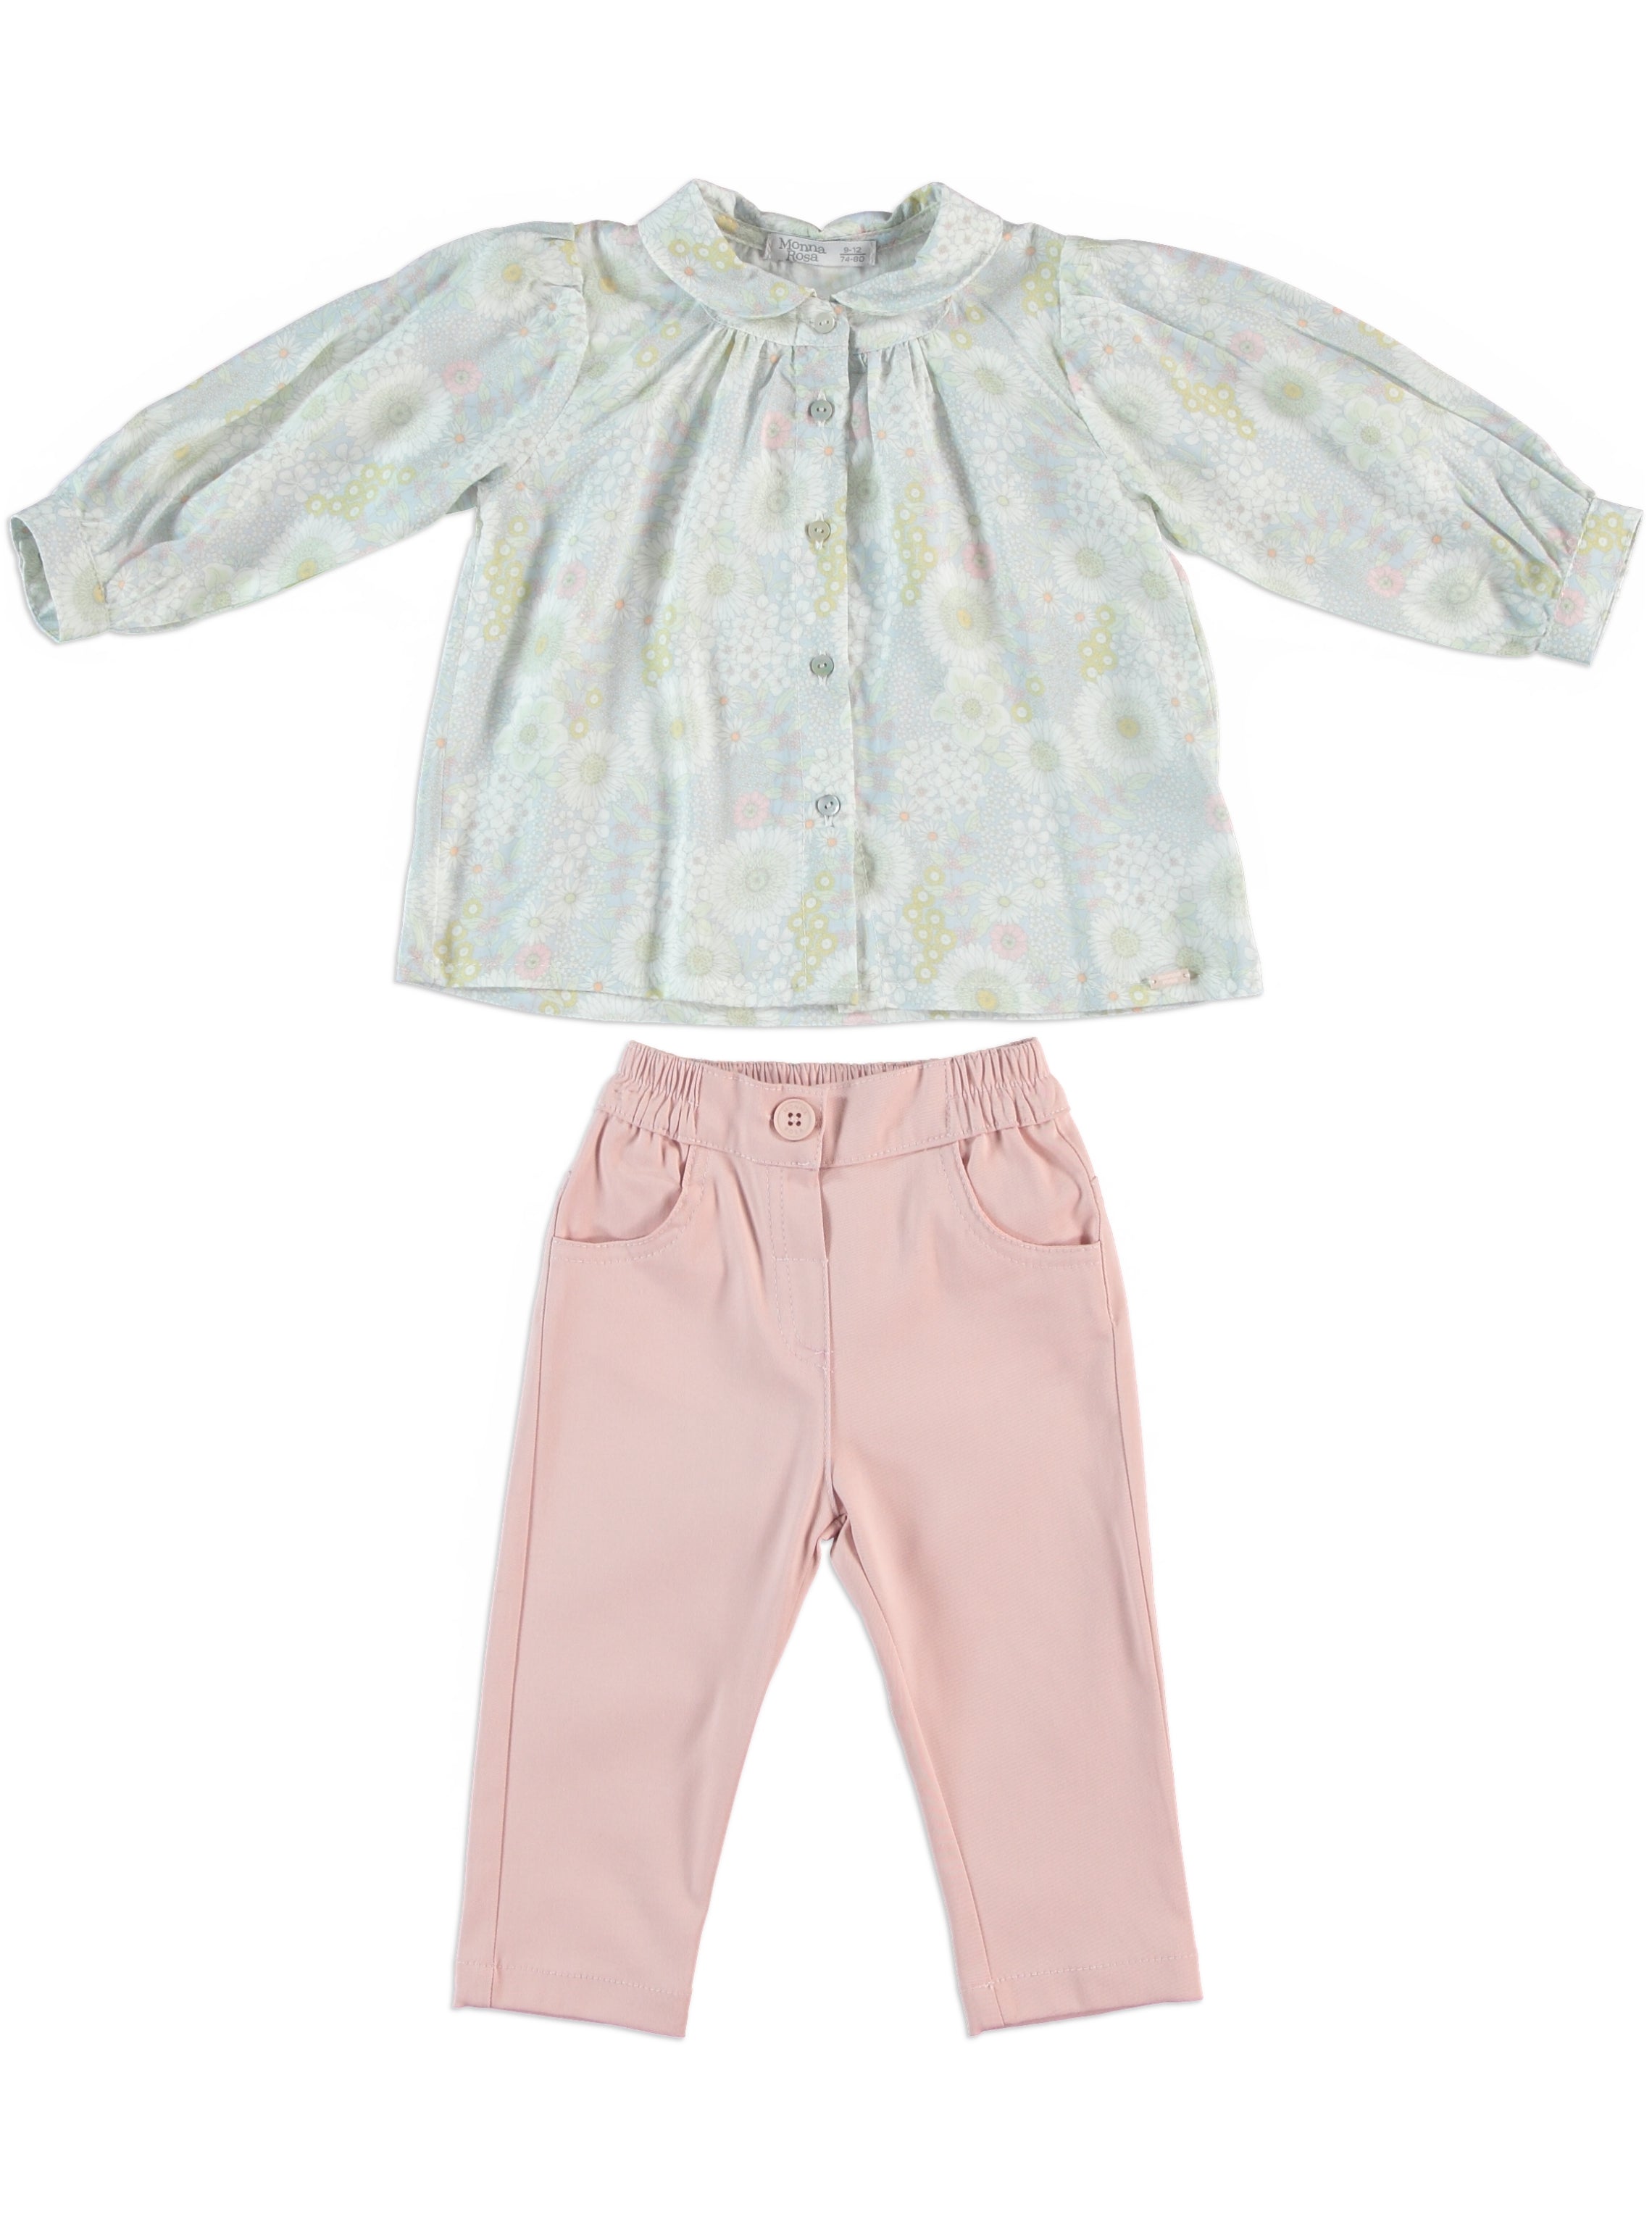 Floral Top With Pink Pants Set